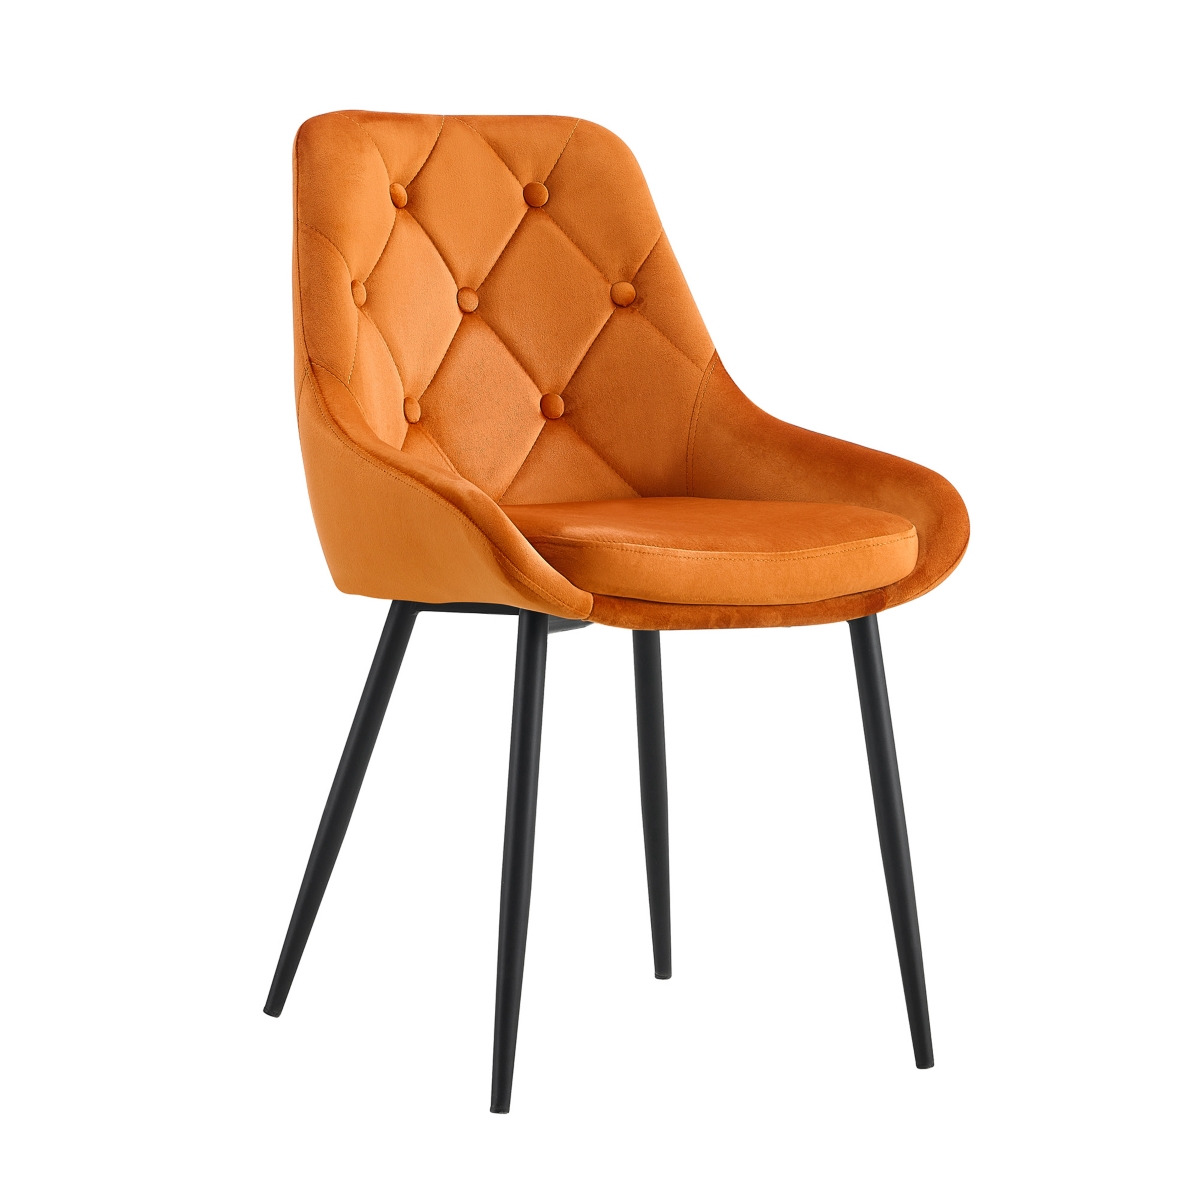 Simplie Fun Modern Orange Velvet Dining Chairs, Fabric Accent Upholstered Chairs Side Chair With Black Legs For